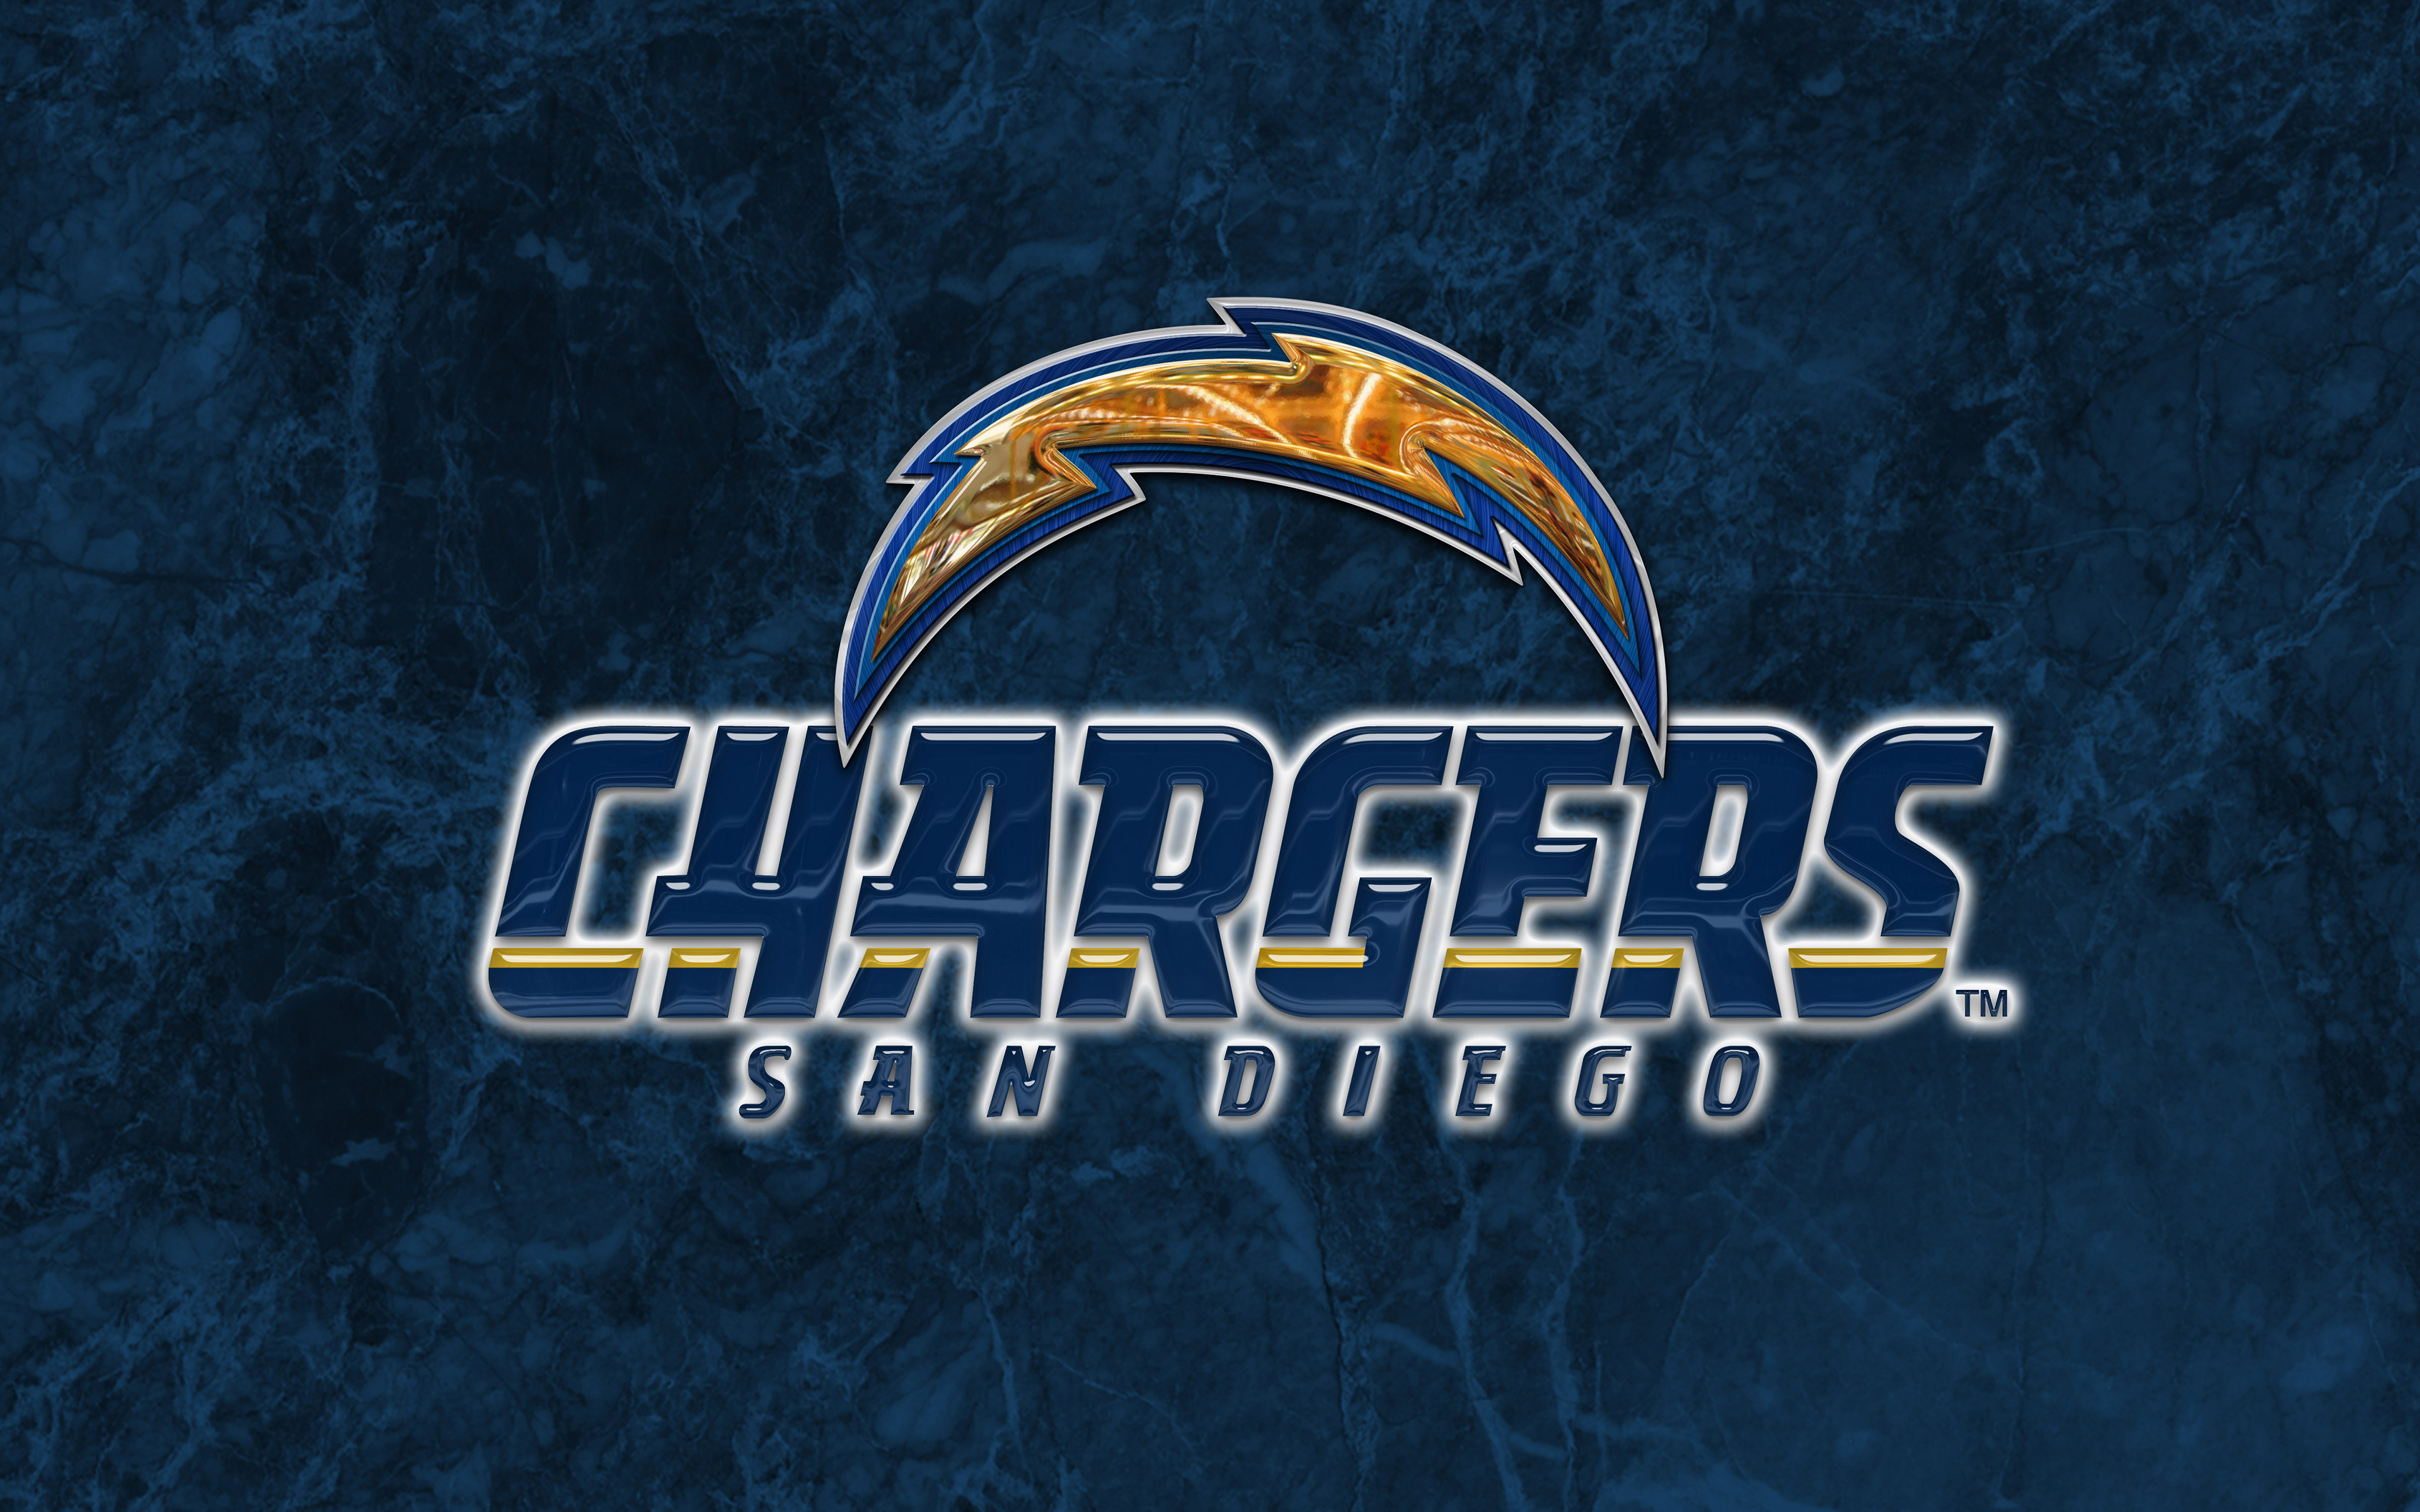 San Diego Chargers 2014 NFL Logo Wallpaper 3840x2400